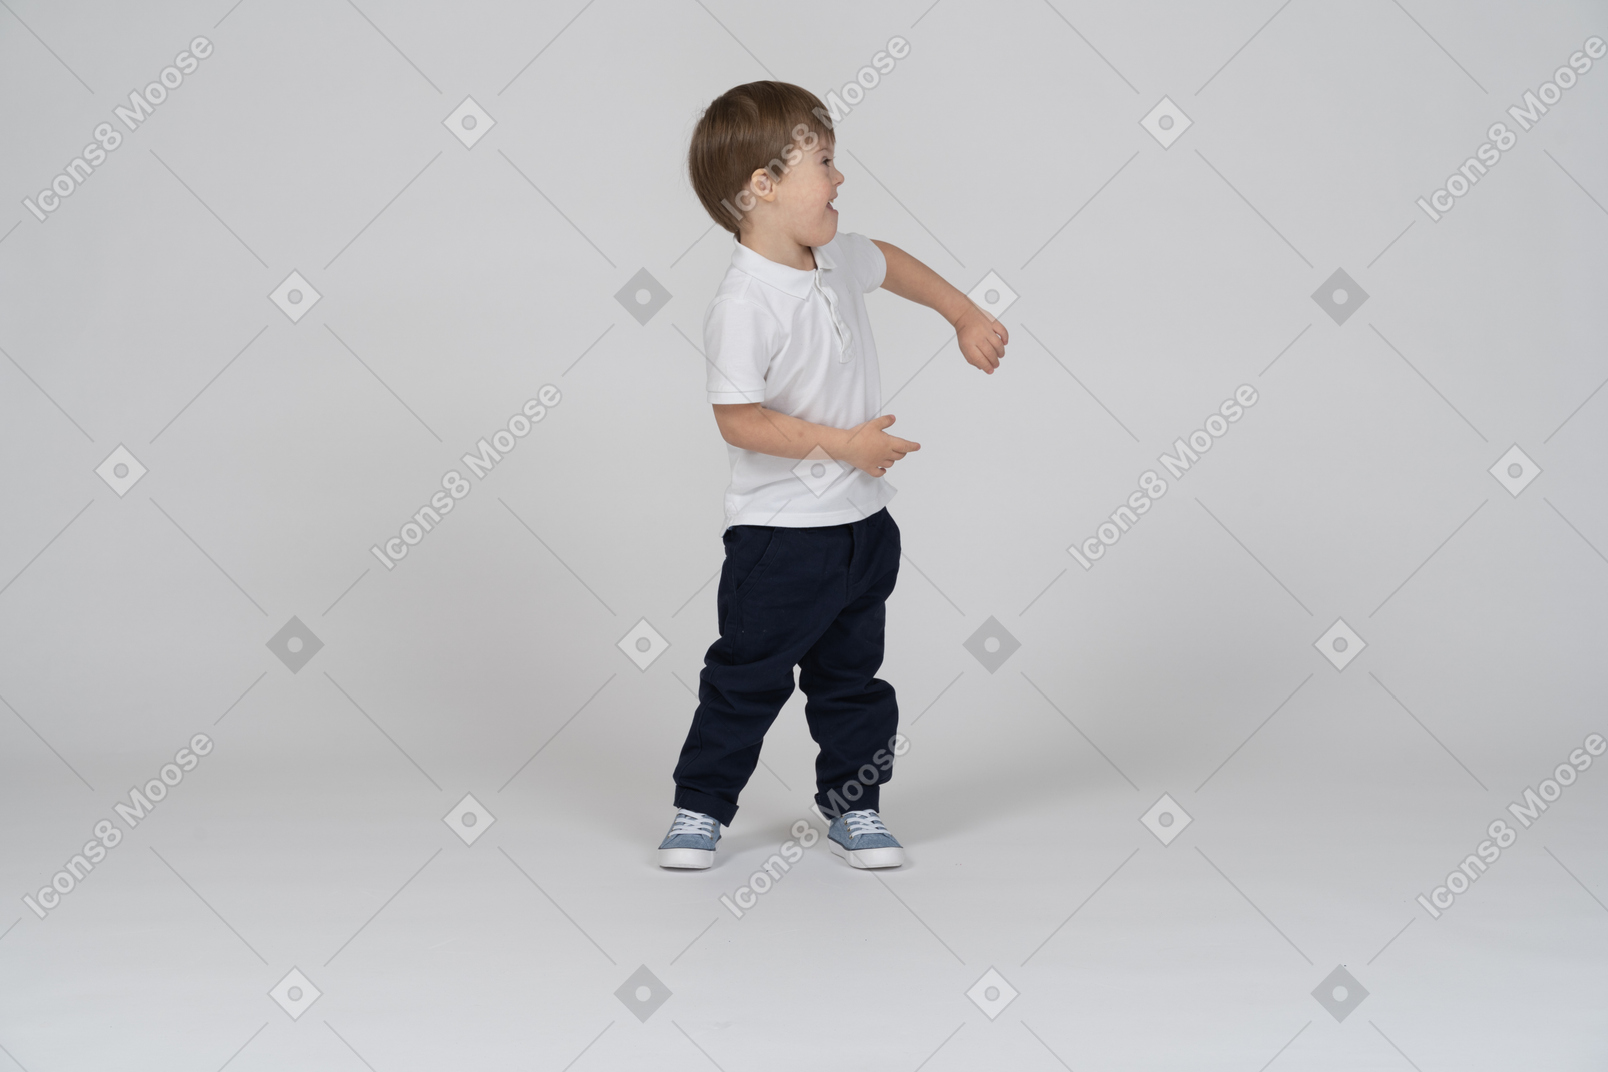 Cheerful little boy moving his arms around